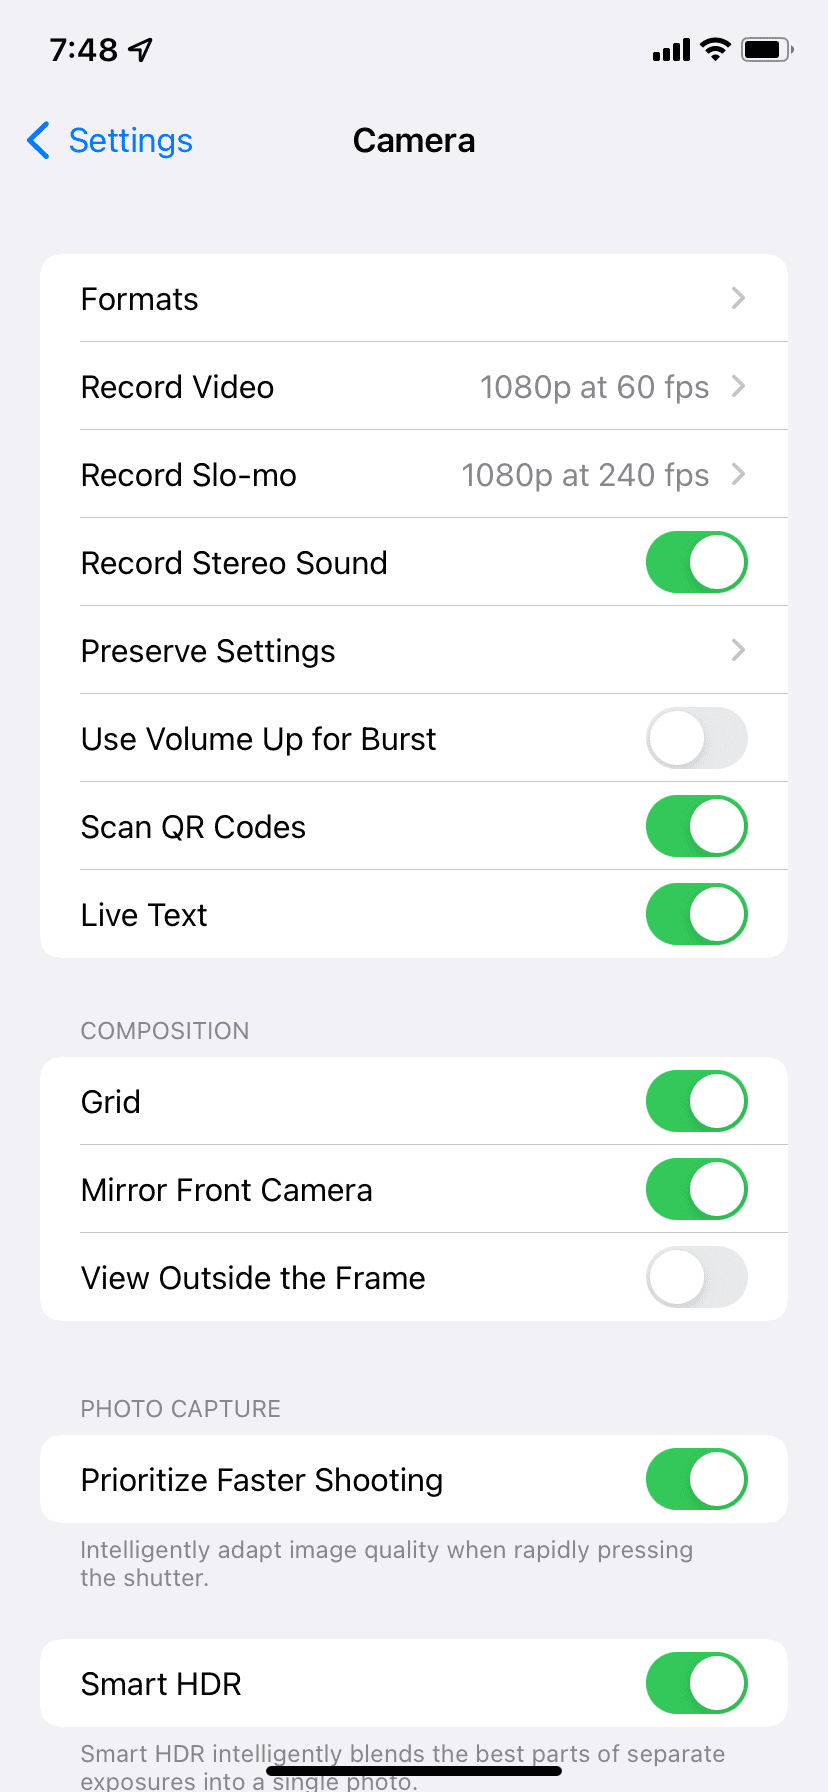 iPhone Camera Settings with Preserve Settings option